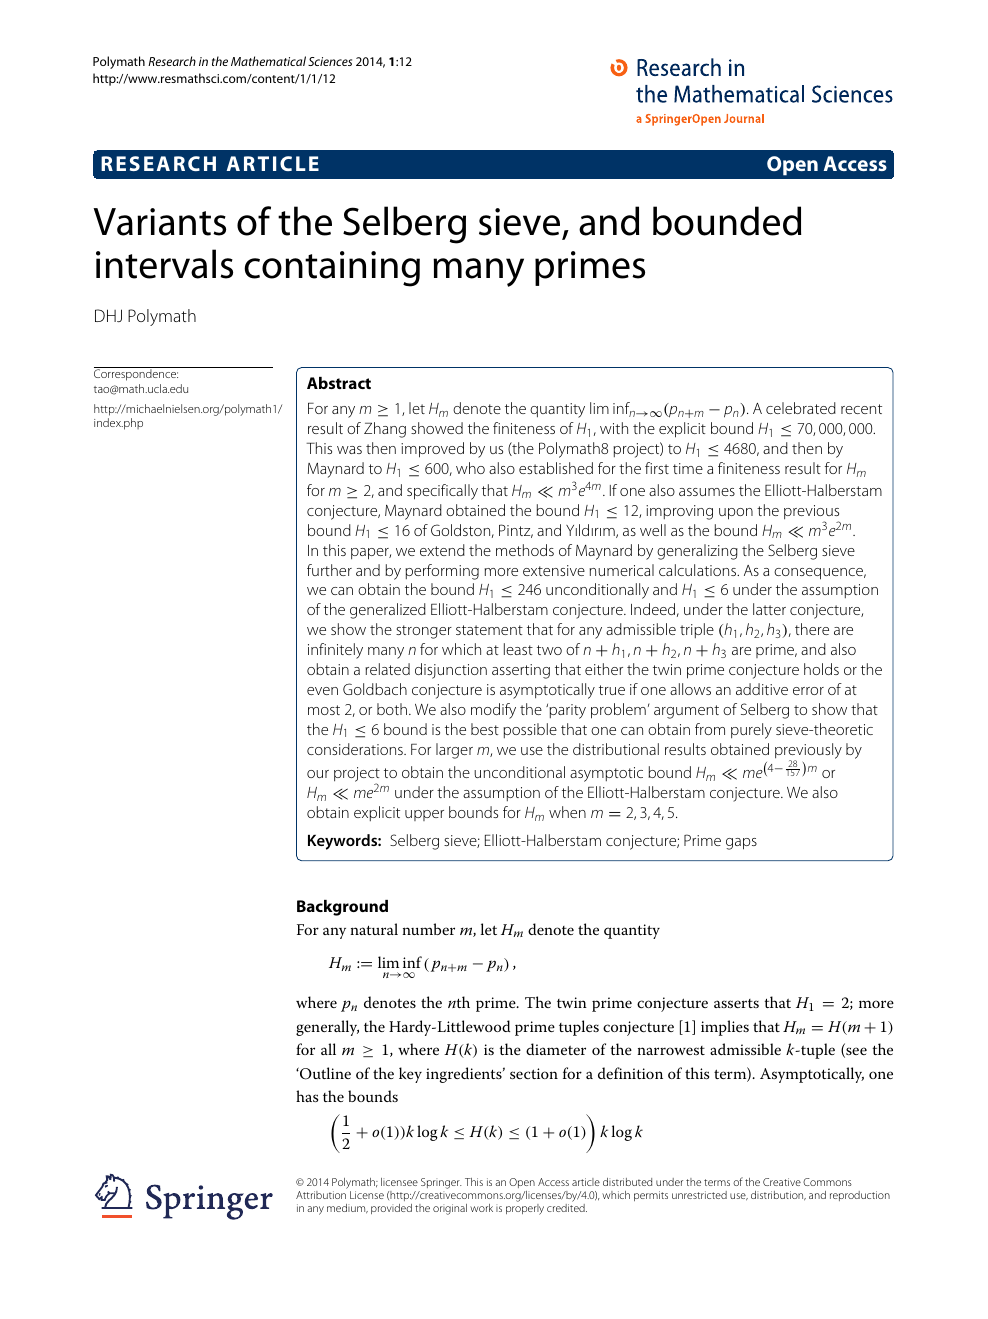 Variants Of The Selberg Sieve And Bounded Intervals Containing Many Primes Topic Of Research Paper In Mathematics Download Scholarly Article Pdf And Read For Free On Cyberleninka Open Science Hub